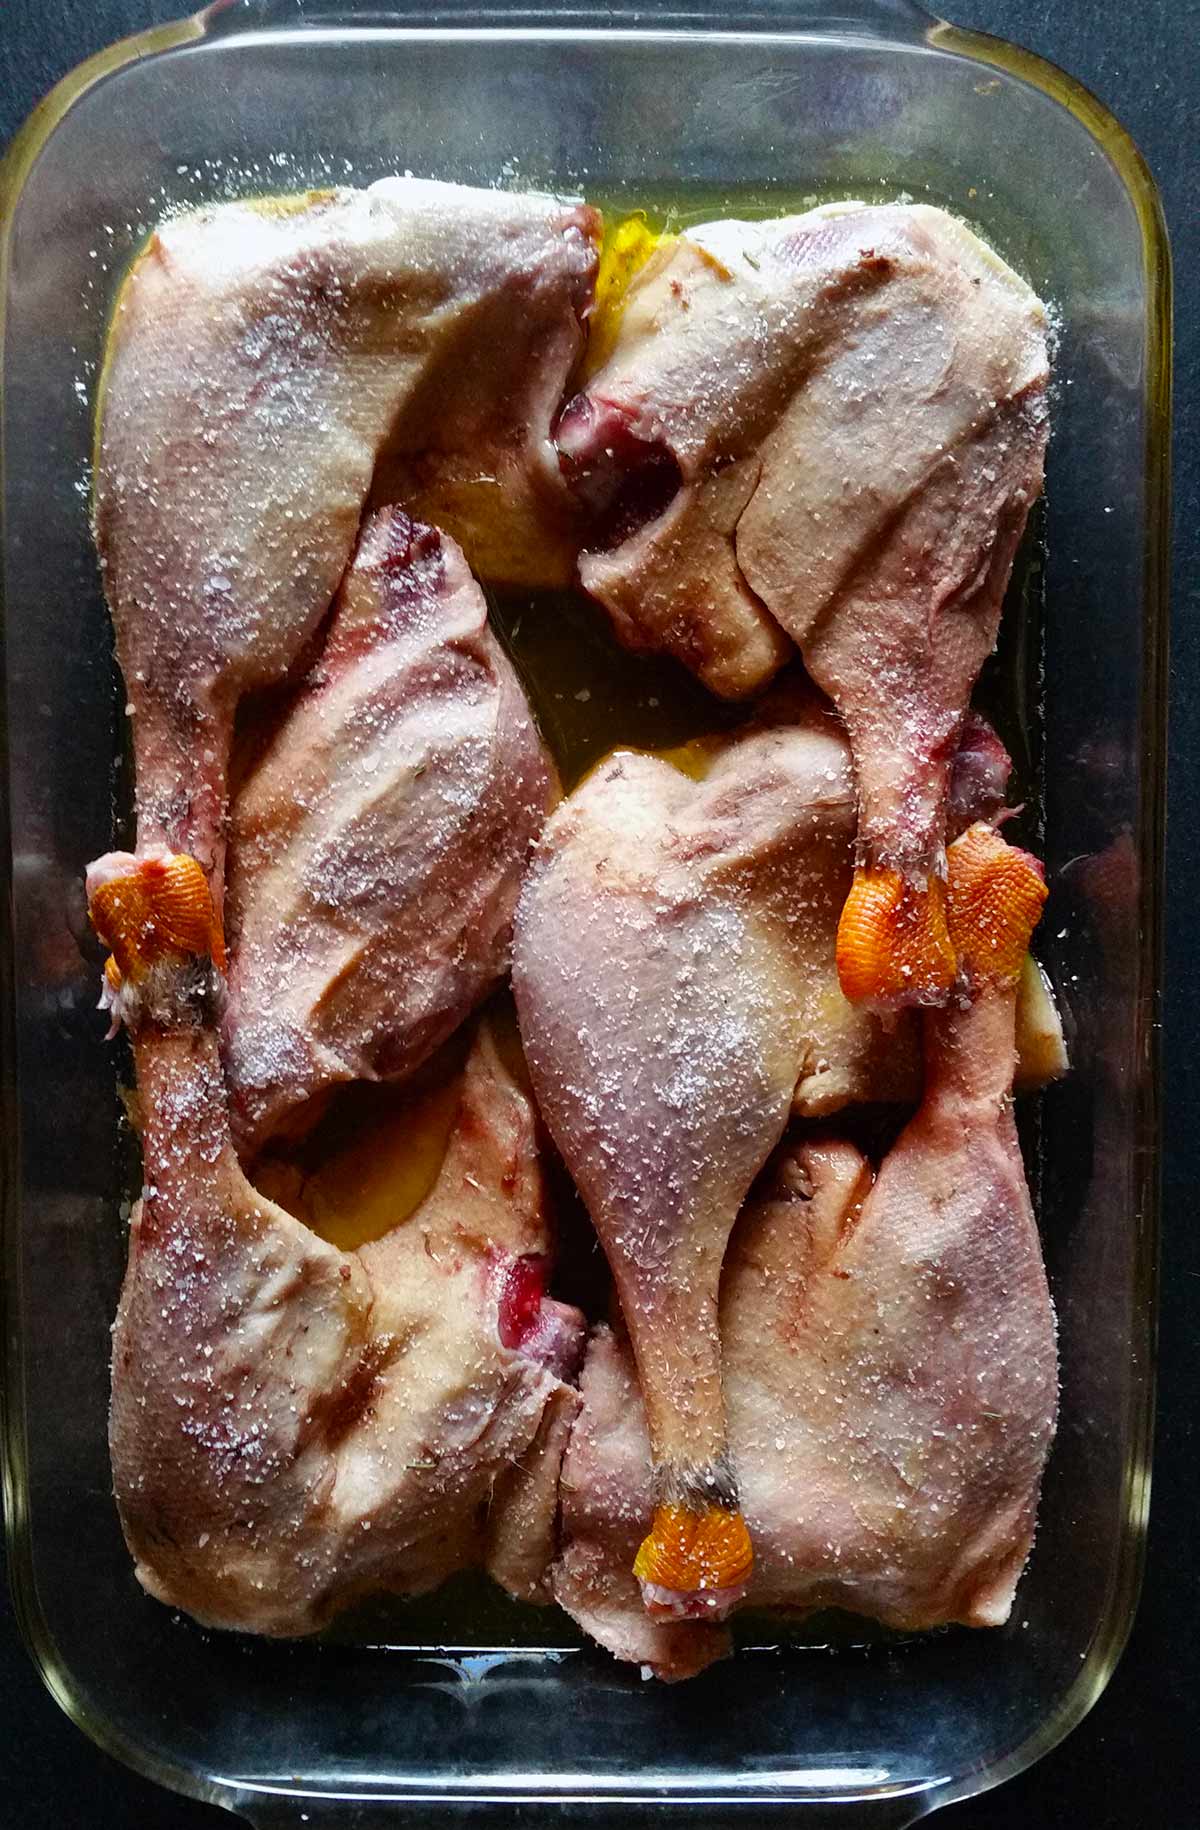 Uncooked duck legs ready for the oven